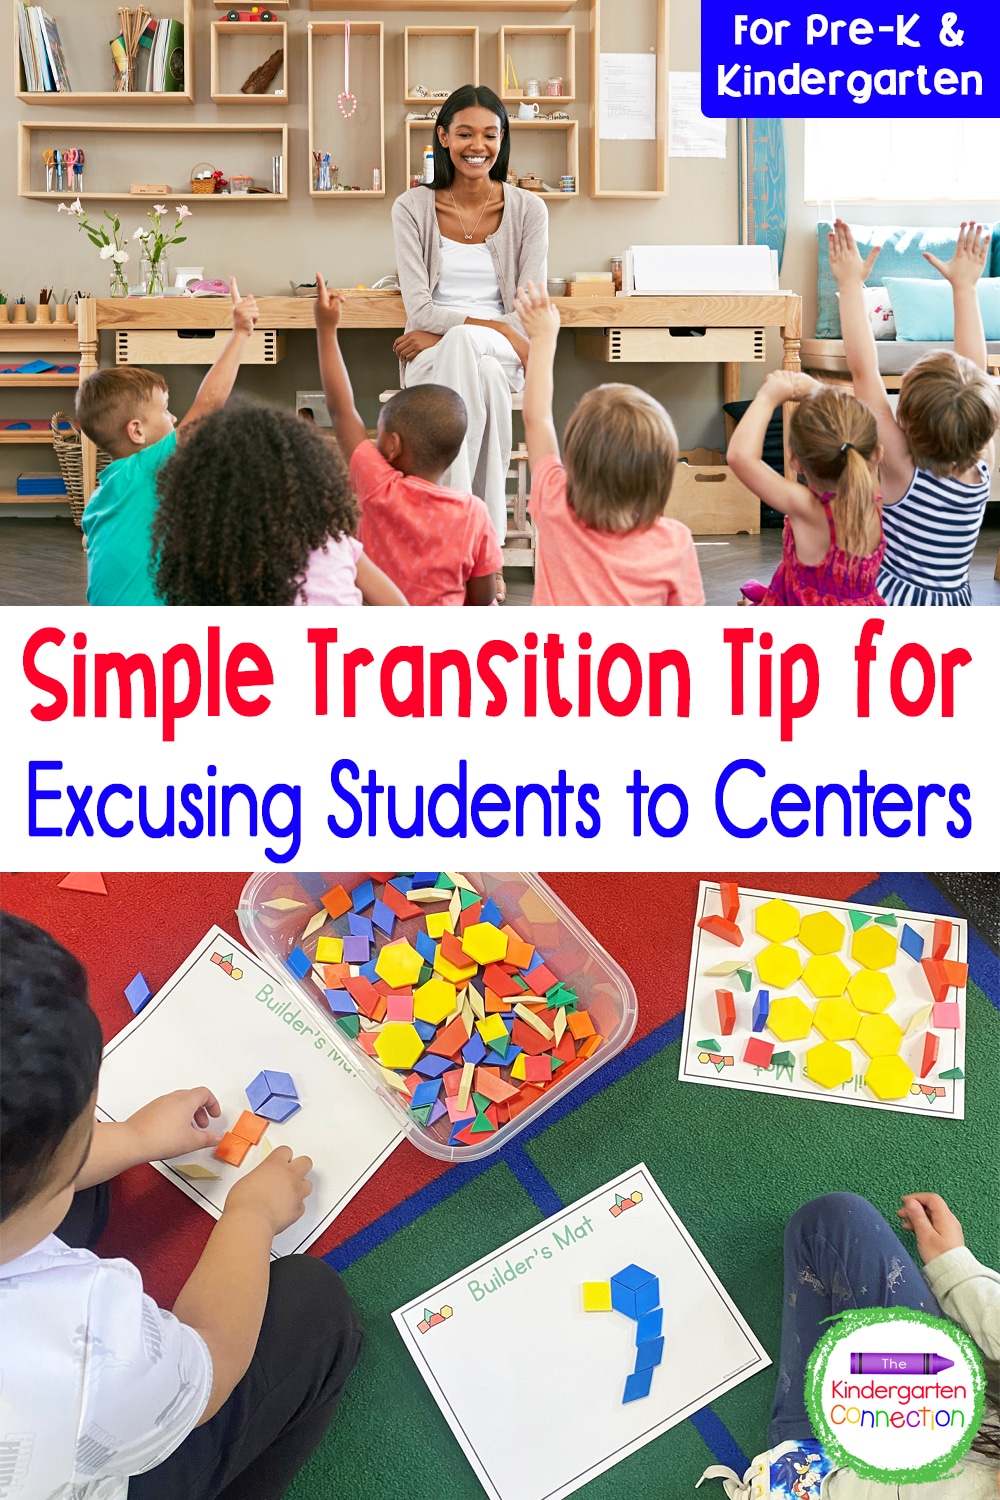 Simple Classroom Transition Tip for Excusing Students to Centers